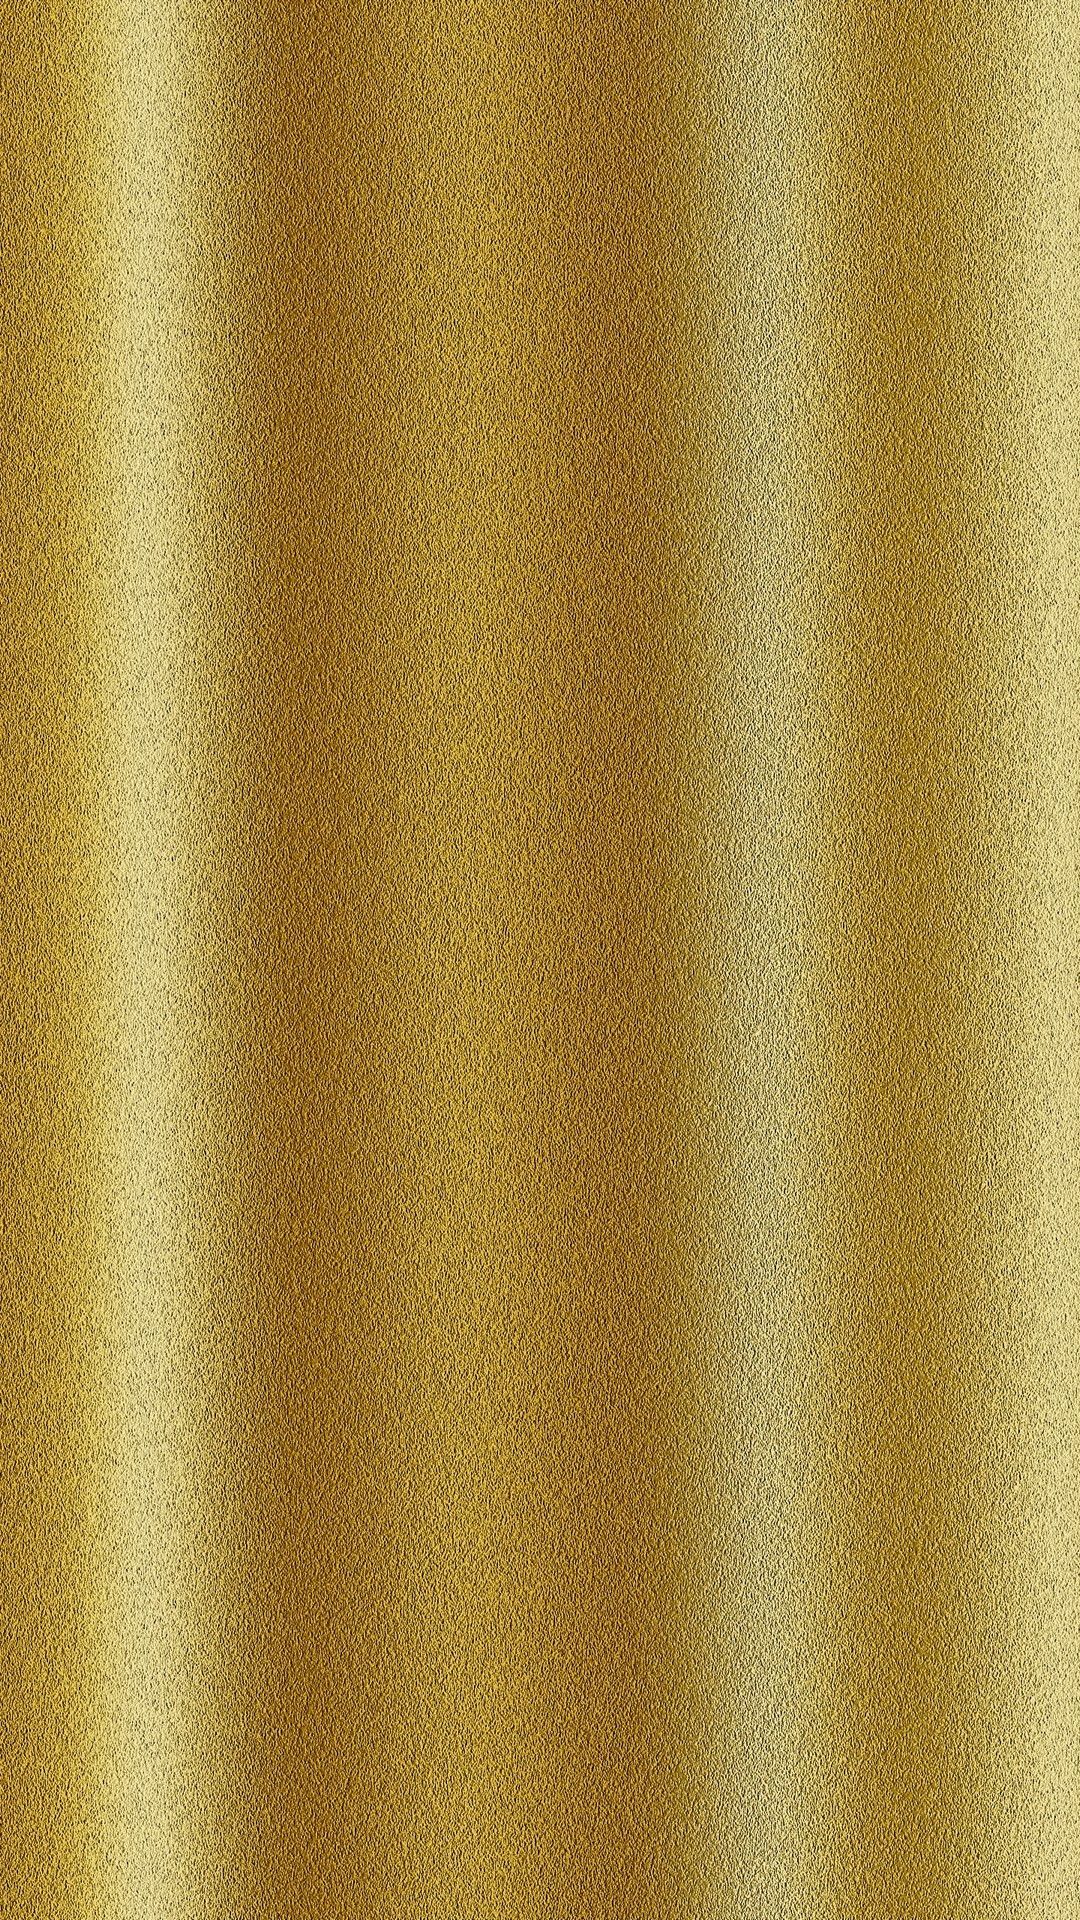 Metallic Gold Android Wallpaper Android Wallpaper. Gold wallpaper, Android wallpaper, Gold metal